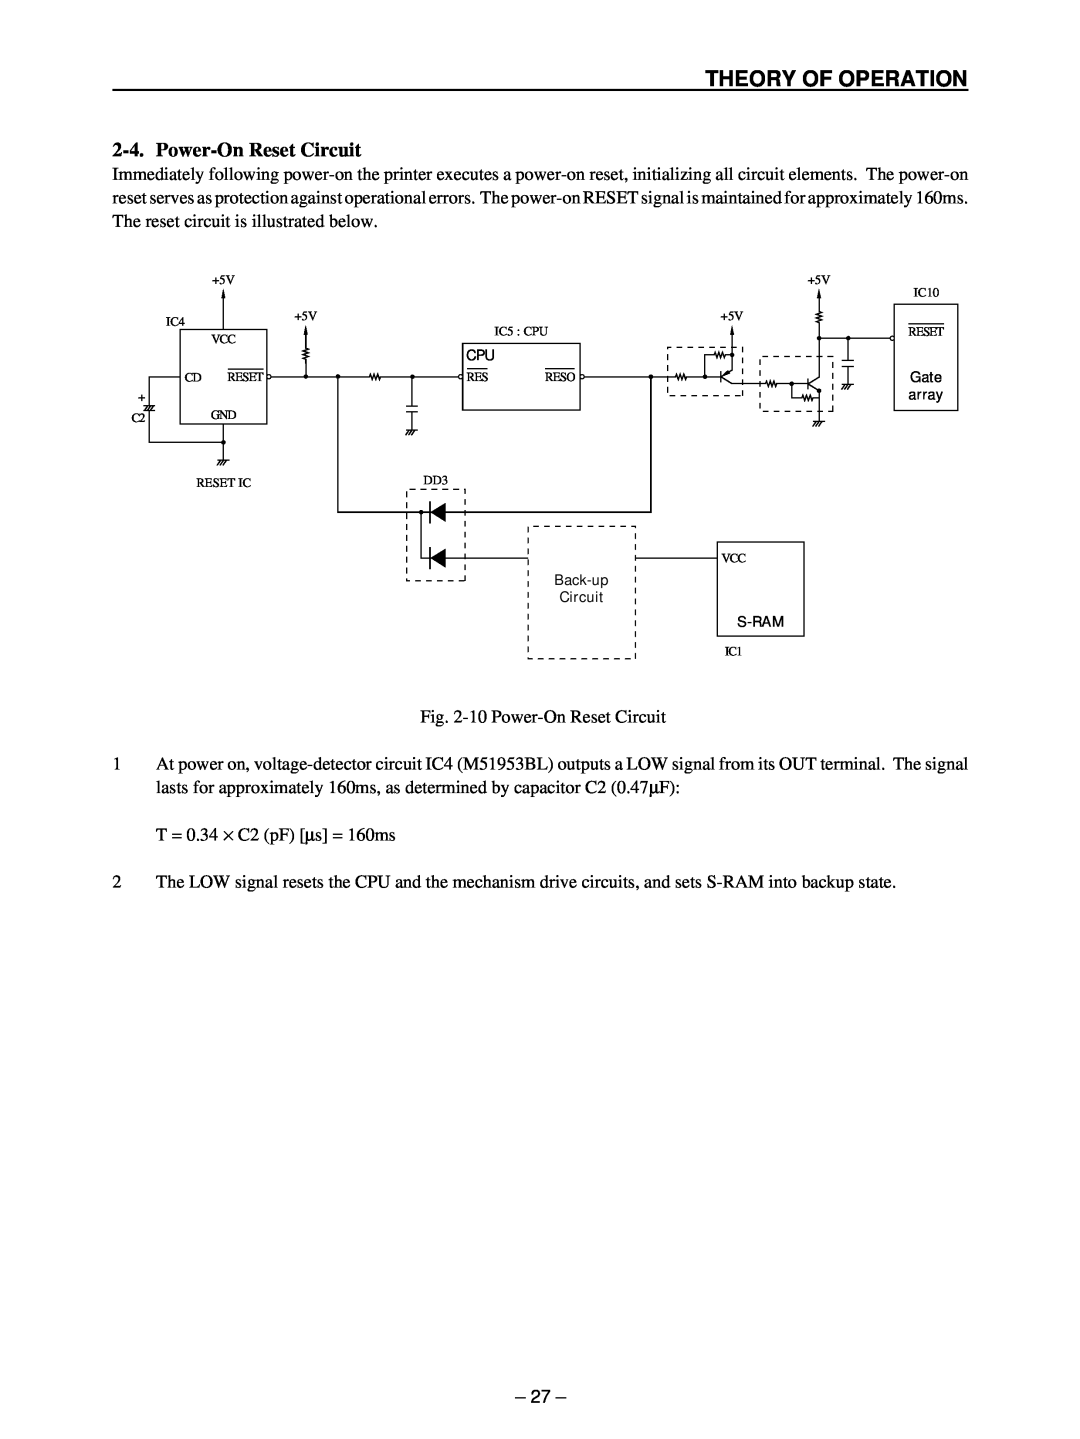 Star Micronics TSP400 technical manual Power-On Reset Circuit, Theory Of Operation 